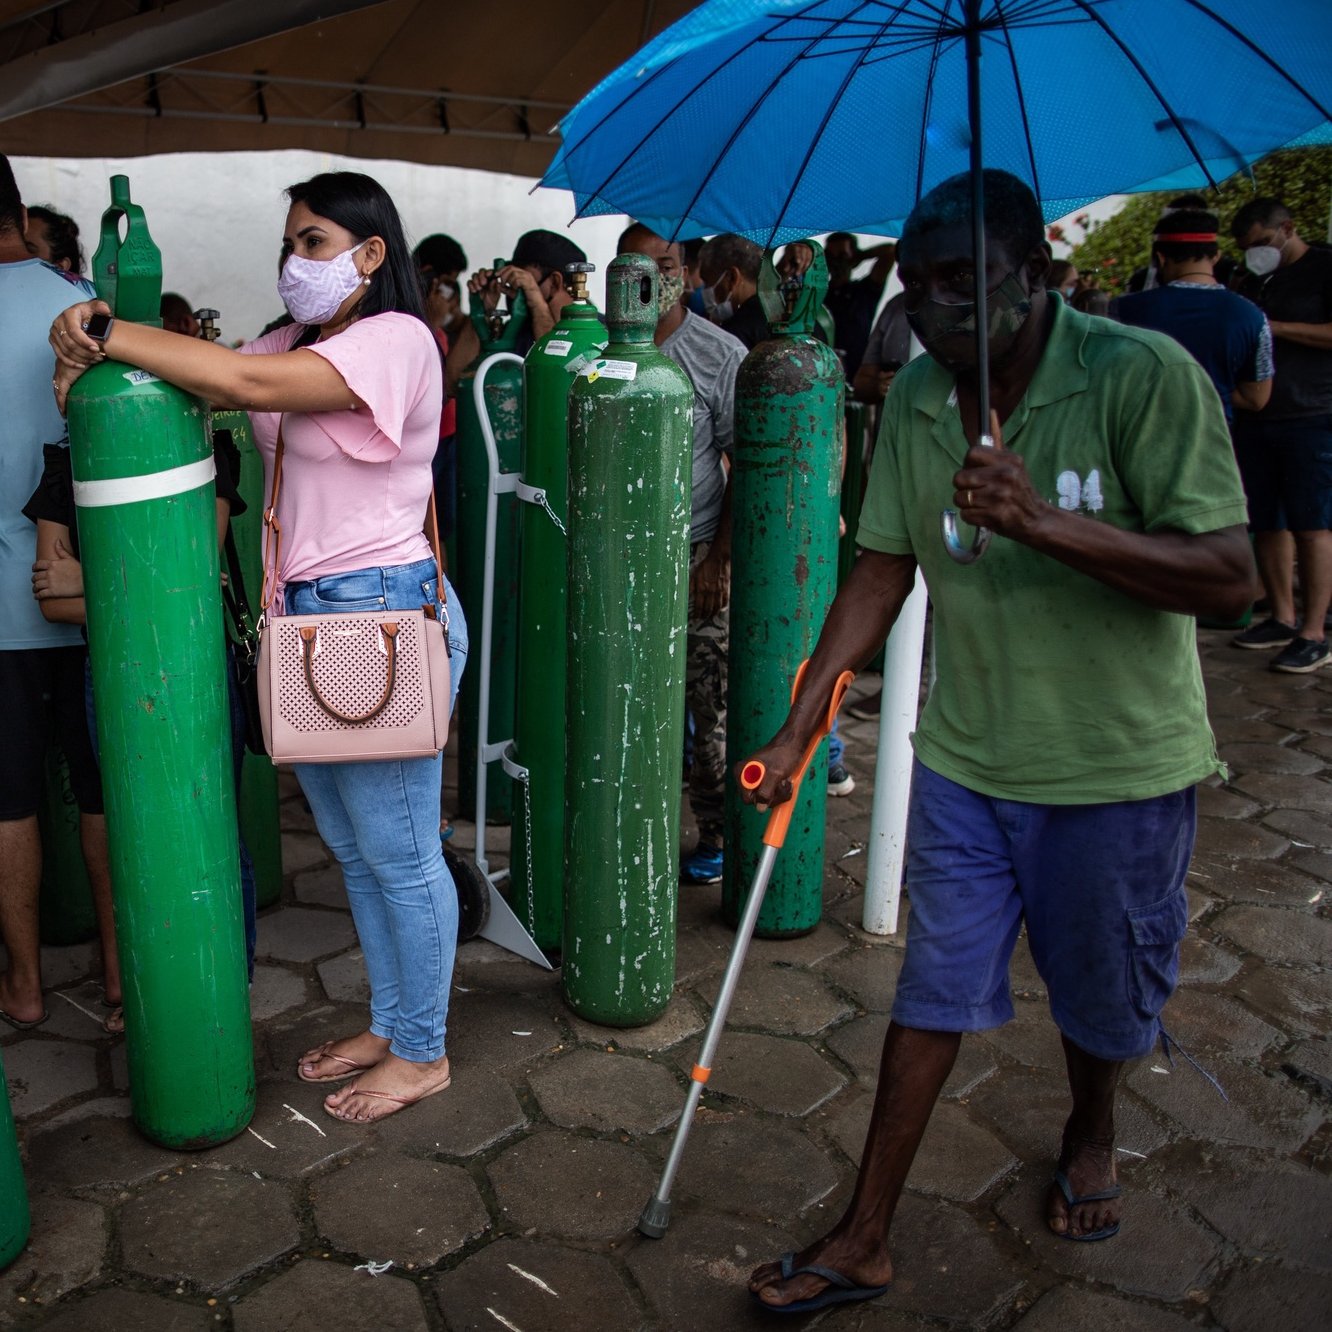 epa08949847 Relatives of patients infected with Covid-19 wait for hours since early in the morning to refill their oxygen cylinders at the Carboxi company, in Manaus, Amazonas, Brazil, on 19 January 2021. An air, river and terrestrial fleet began on 19 January the distribution of vaccines against covid in the collapsed Brazilian state of Amazonas, vaccines that will have to reach the most distant villages, a tremendous task due to the difficulties imposed by the largest jungle on the planet.  EPA/RAPHAEL ALVES